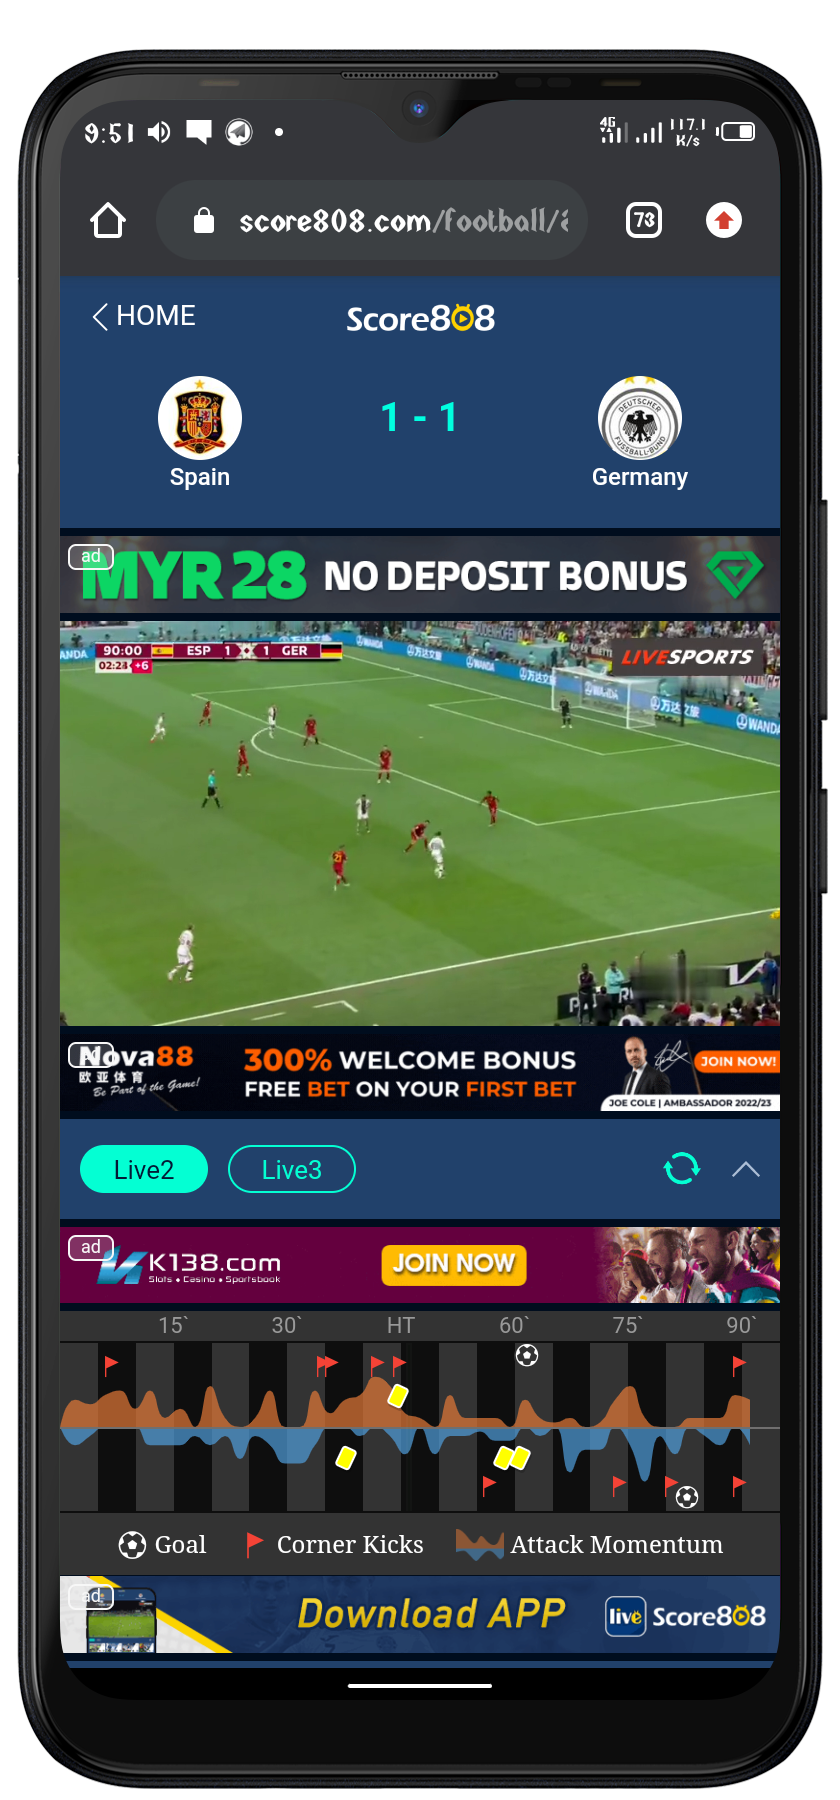 How To Watch Live Football Matches Without APK Primetechs Blog» Android and Pc Tricks Games Primetechs Blog» Free Browsing and Android Tricks